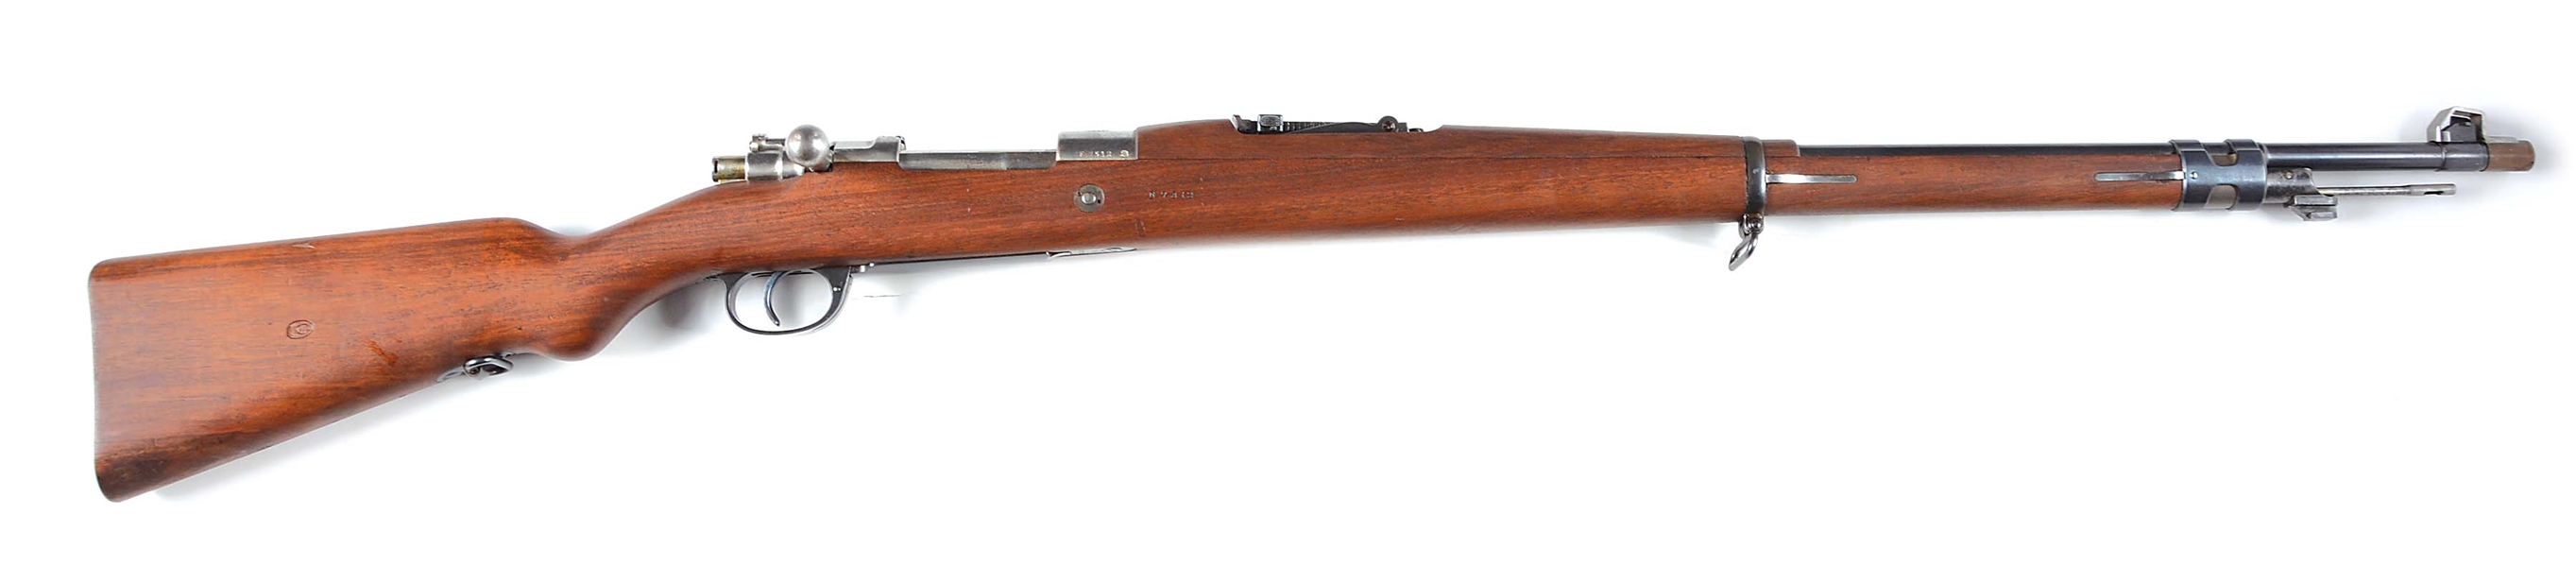 (C) MAUSER ARGENTINO MODEL 1909 BOLT ACTION RIFLE.